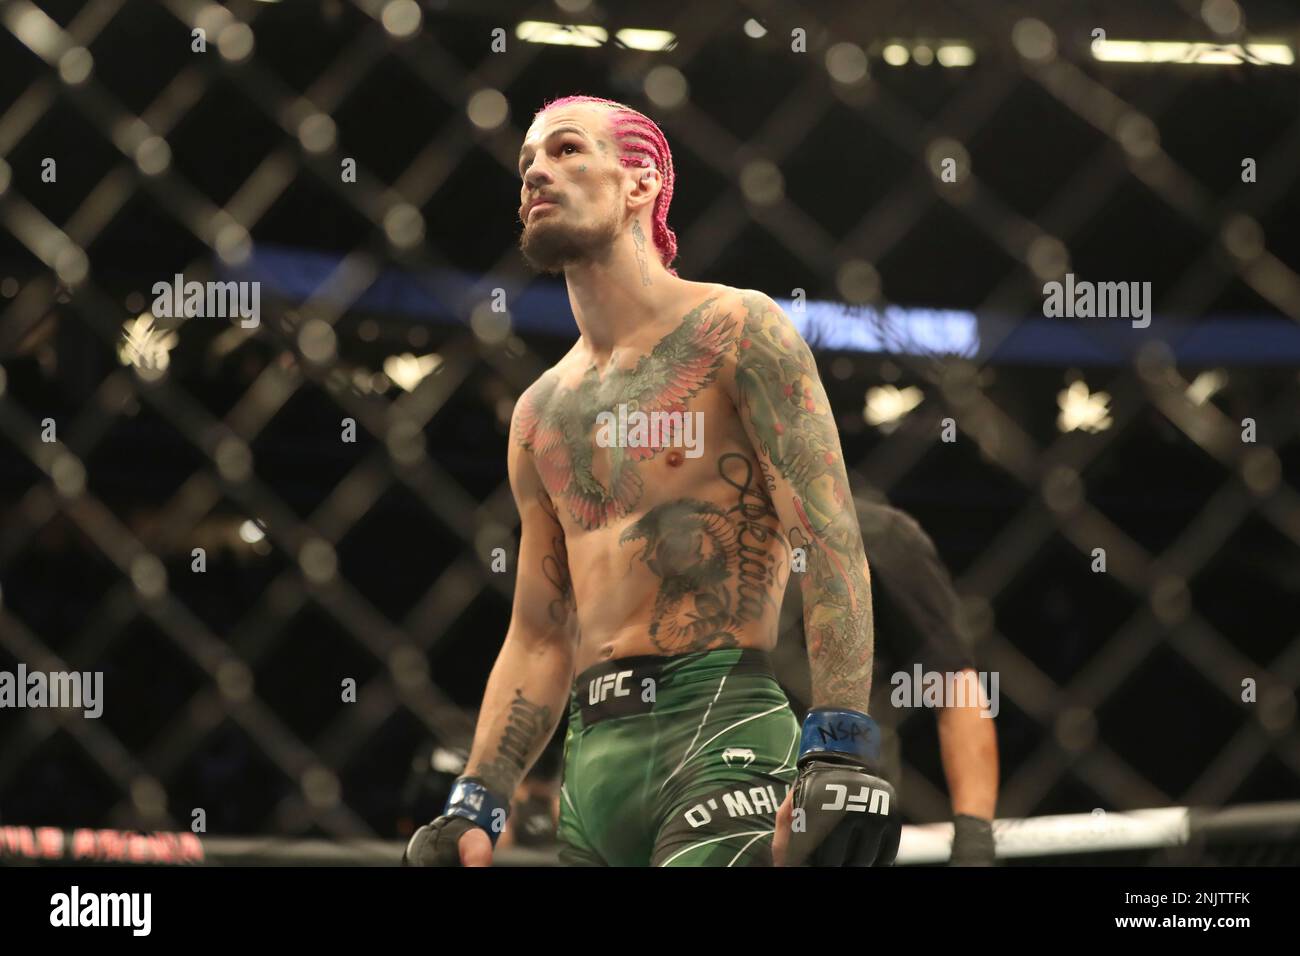 LAS VEGAS, NV - JULY 2: Sean O'Malley prepares to fight Pedro Munhoz in their Bantamweight bout during UFC 276 on July 02, 2022, at T-Mobile Arena in Las Vegas, Nevada. (Photo by Alejandro Salazar/PxImages/Icon Sportswire) (Icon Sportswire via AP Images) Stock Photo